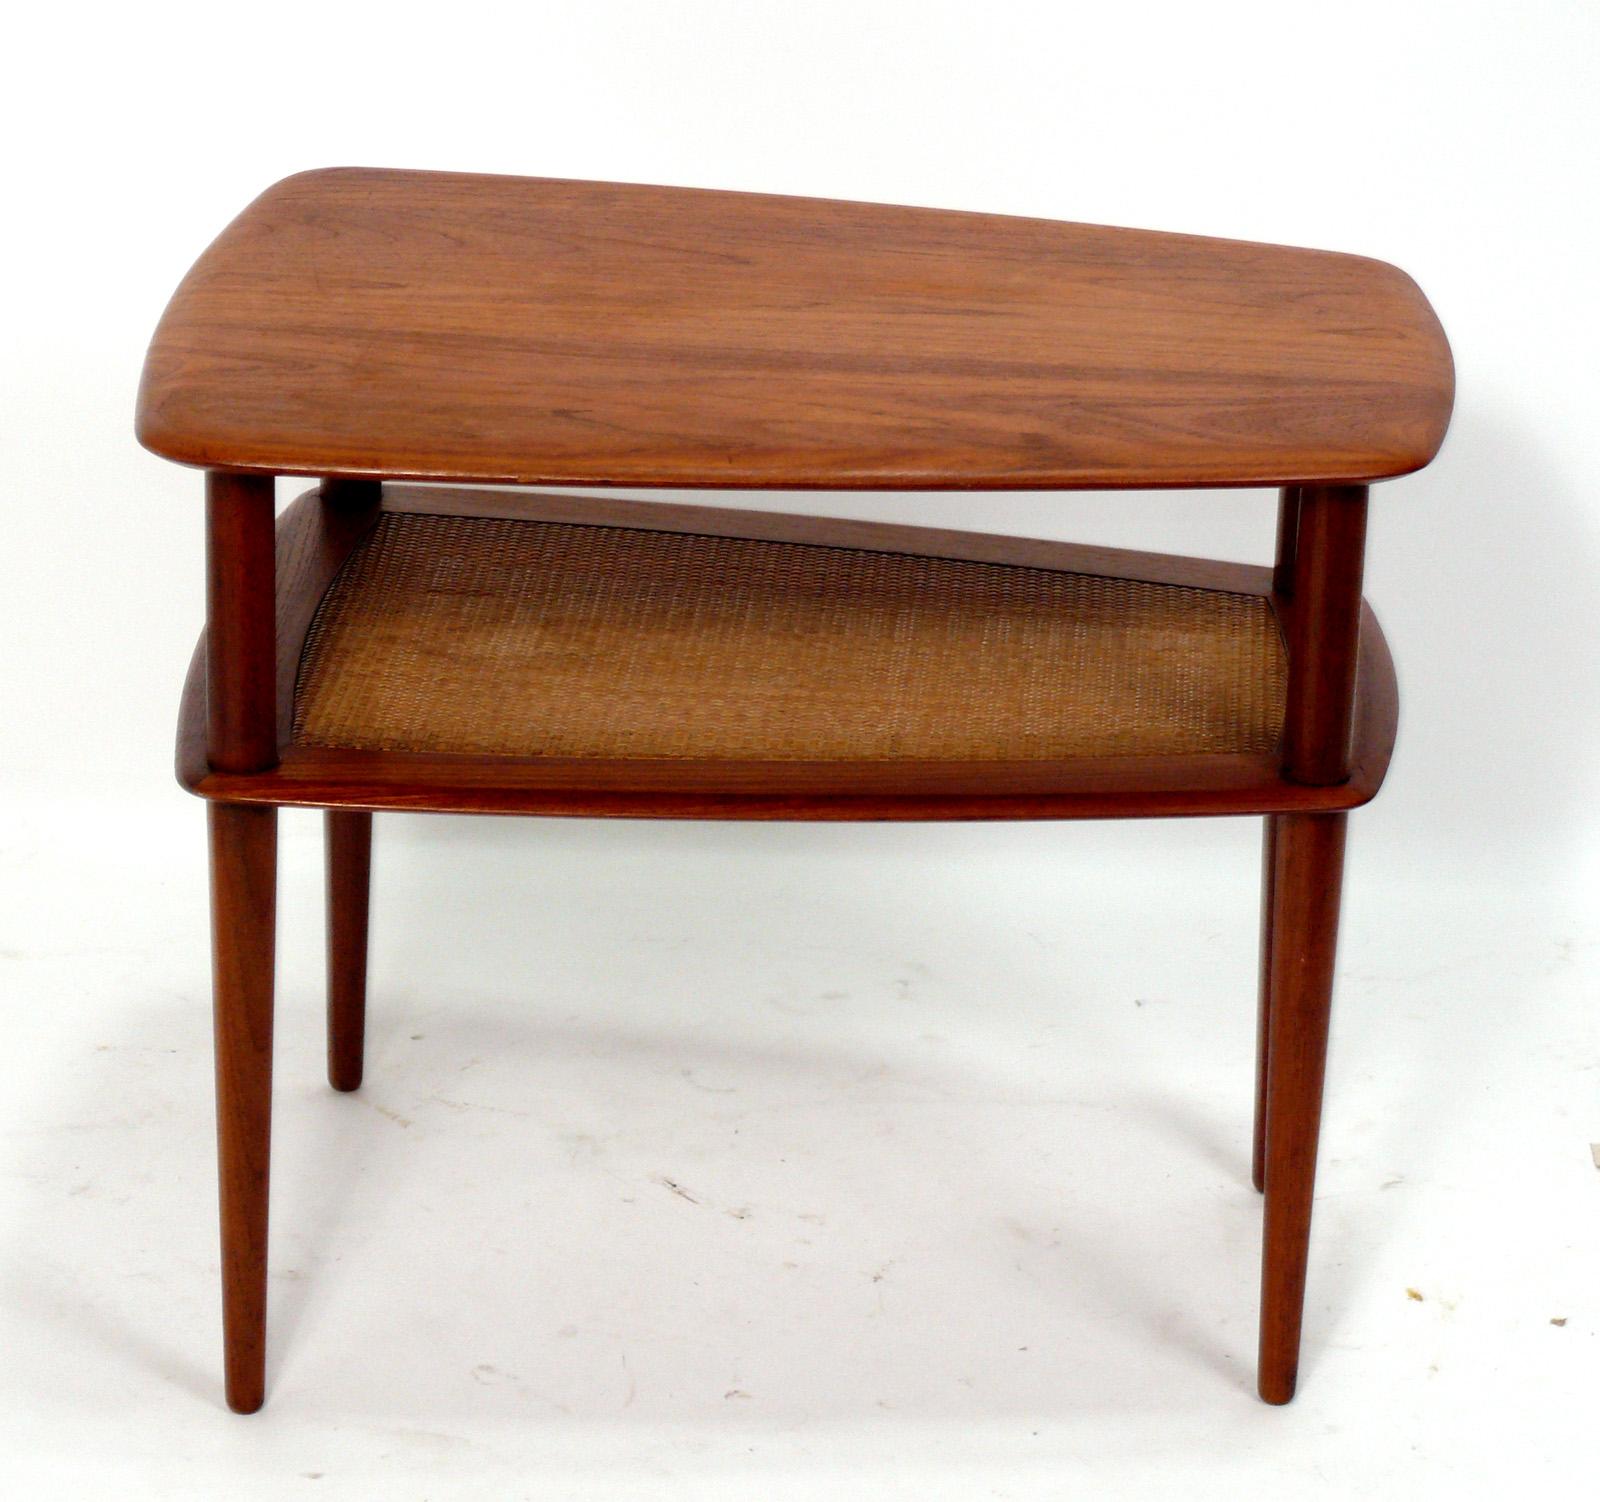 Danish Modern teak and cane end or side table, designed by Peter Hvidt for France and Sons, Denmark, circa 1960s. It is a versatile size and can be used as an end or side table, or as a night stand. It has been cleaned and Danish oiled.